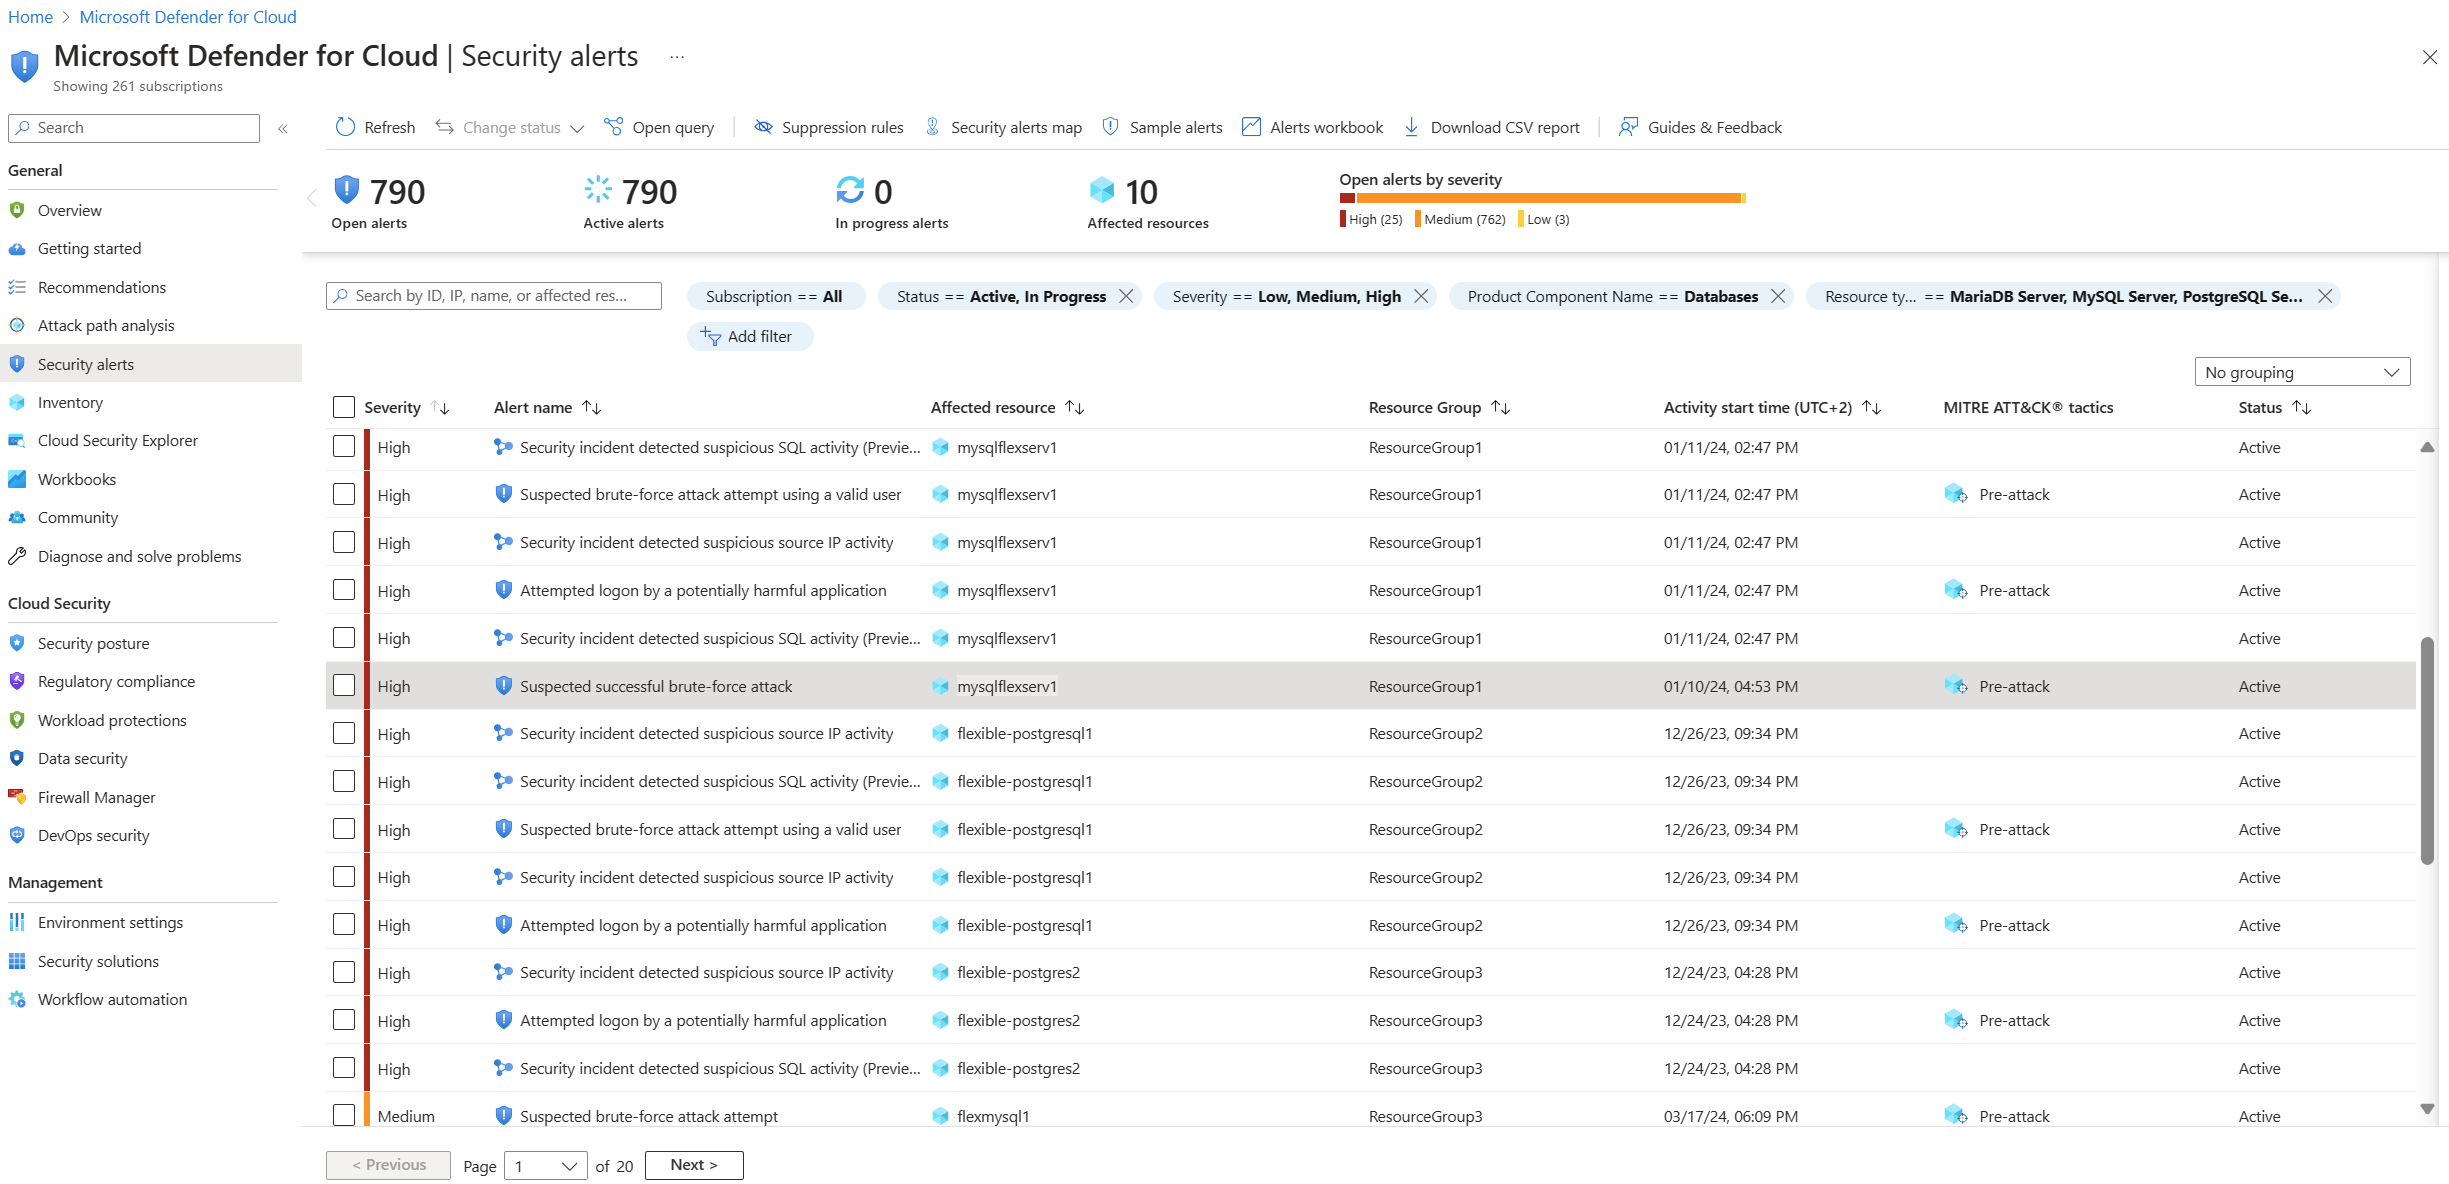 Active threats on one or more subscriptions are shown in Microsoft Defender for Cloud.